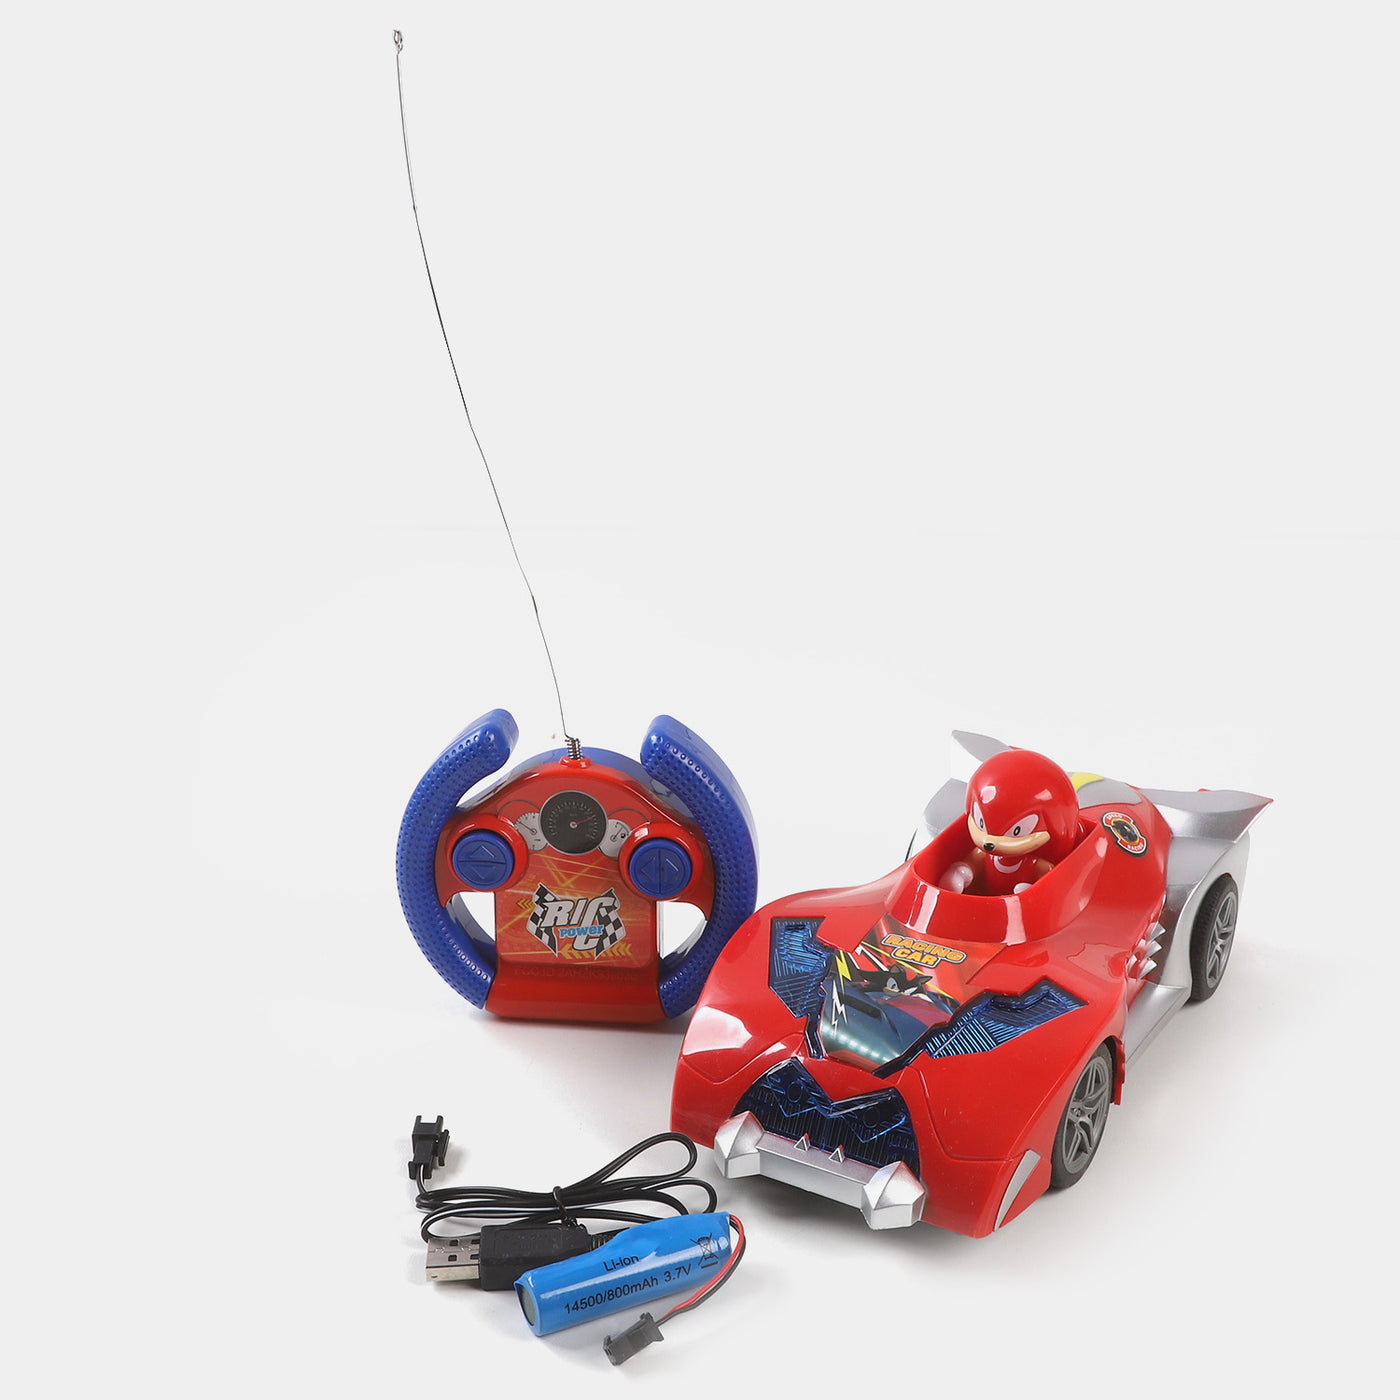 Sports Remote Control Car Toy For Kids